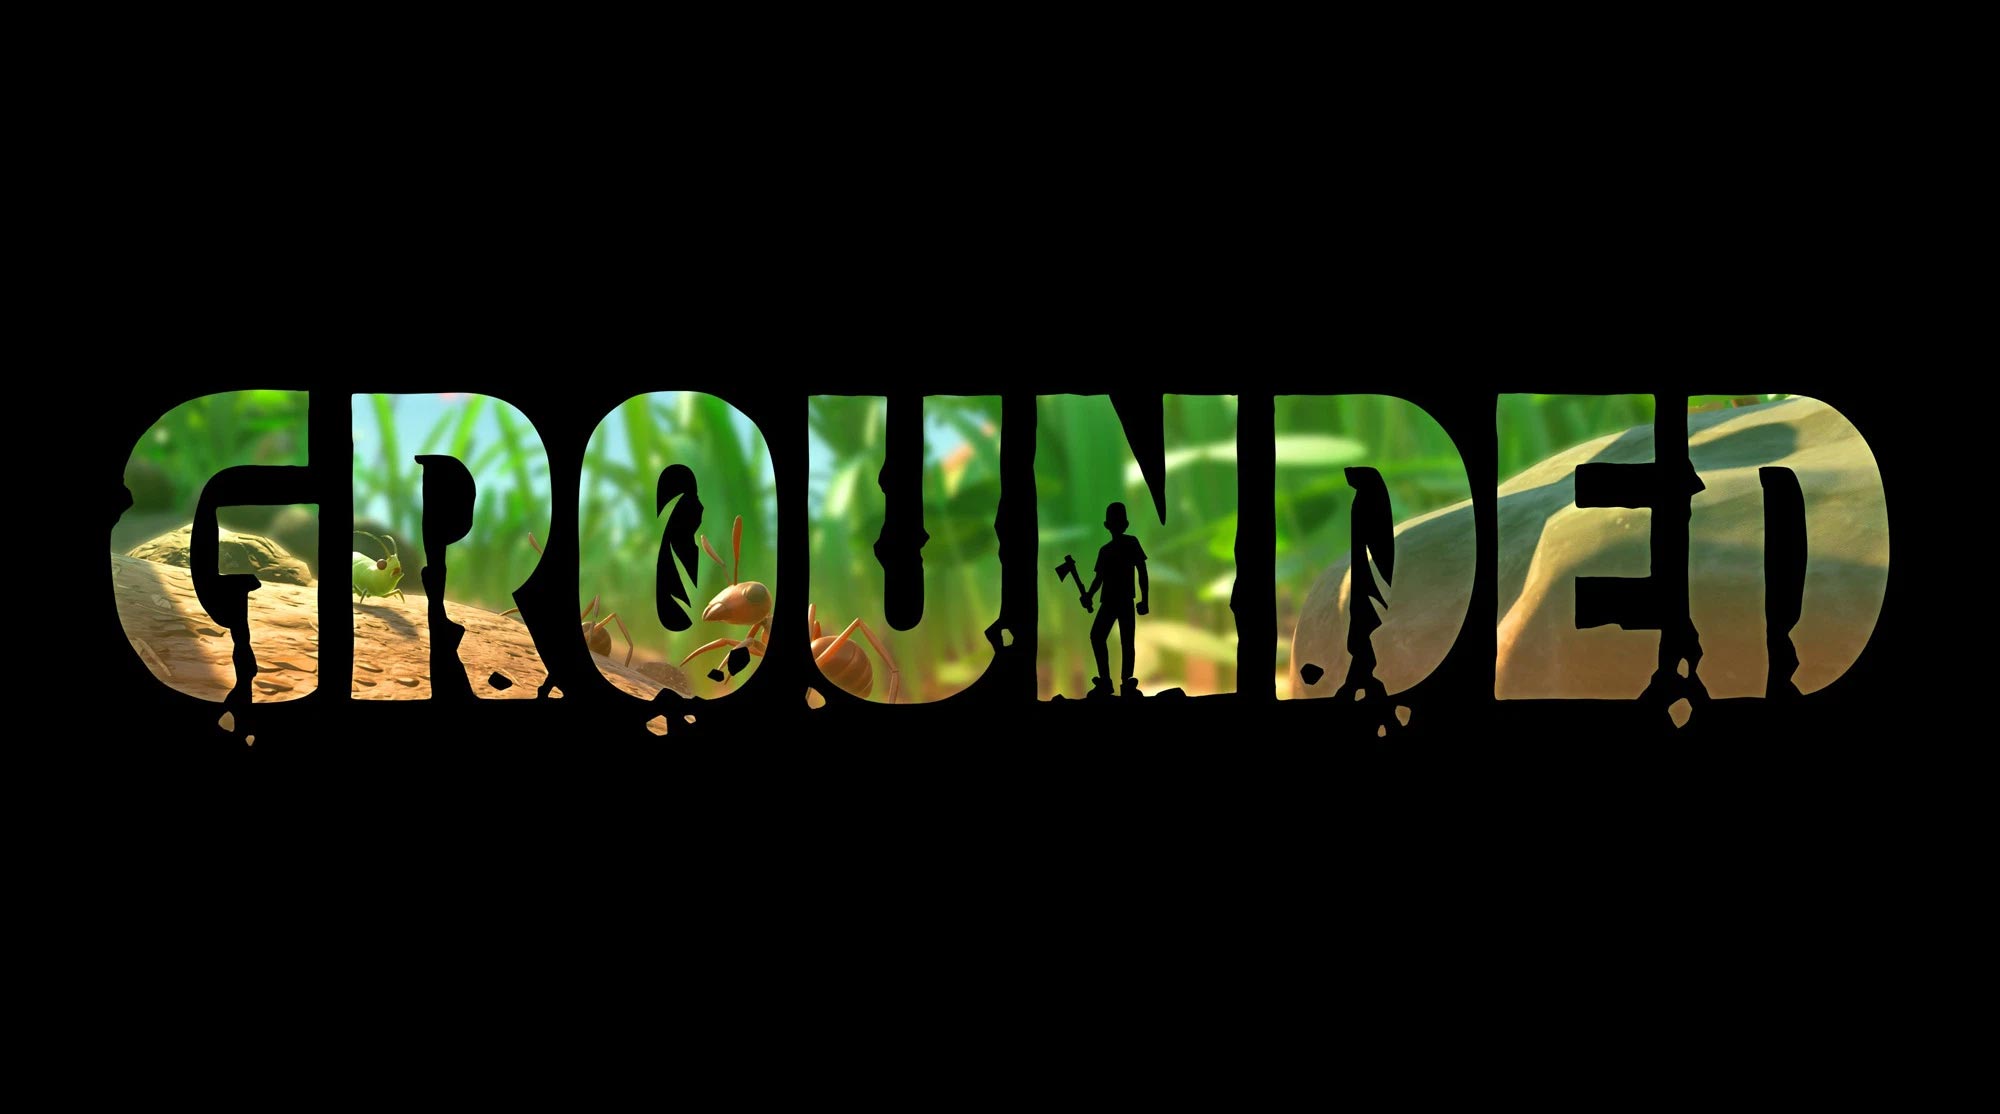 grounded obsidian download